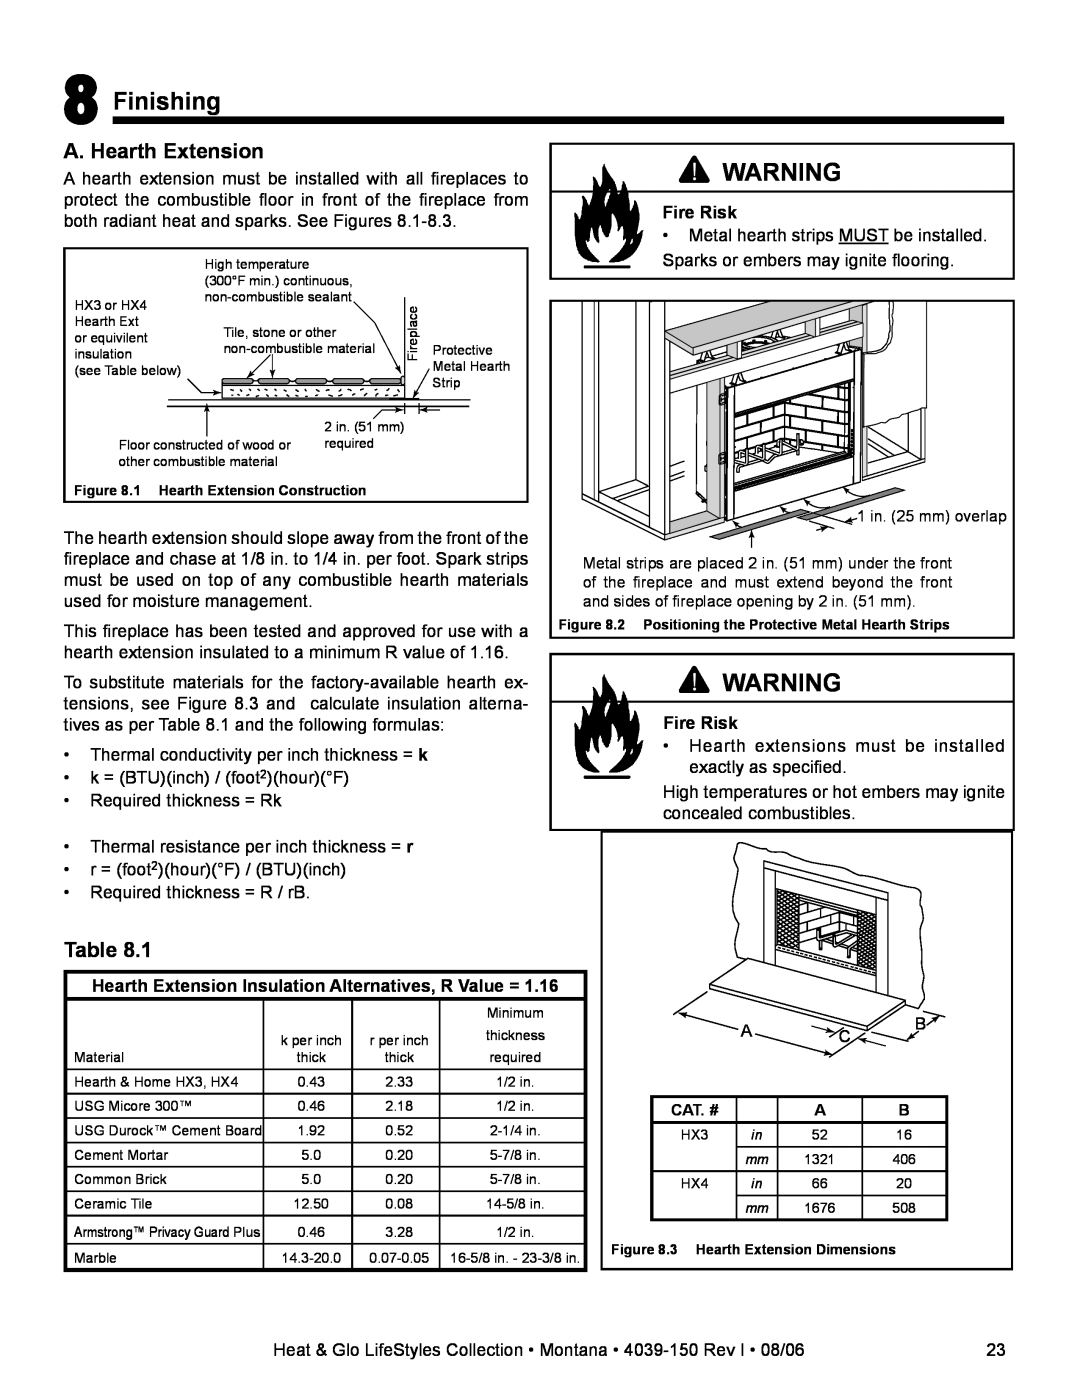 Heat & Glo LifeStyle Montana-36, Montana-42 owner manual Finishing, A. Hearth Extension, Fire Risk 